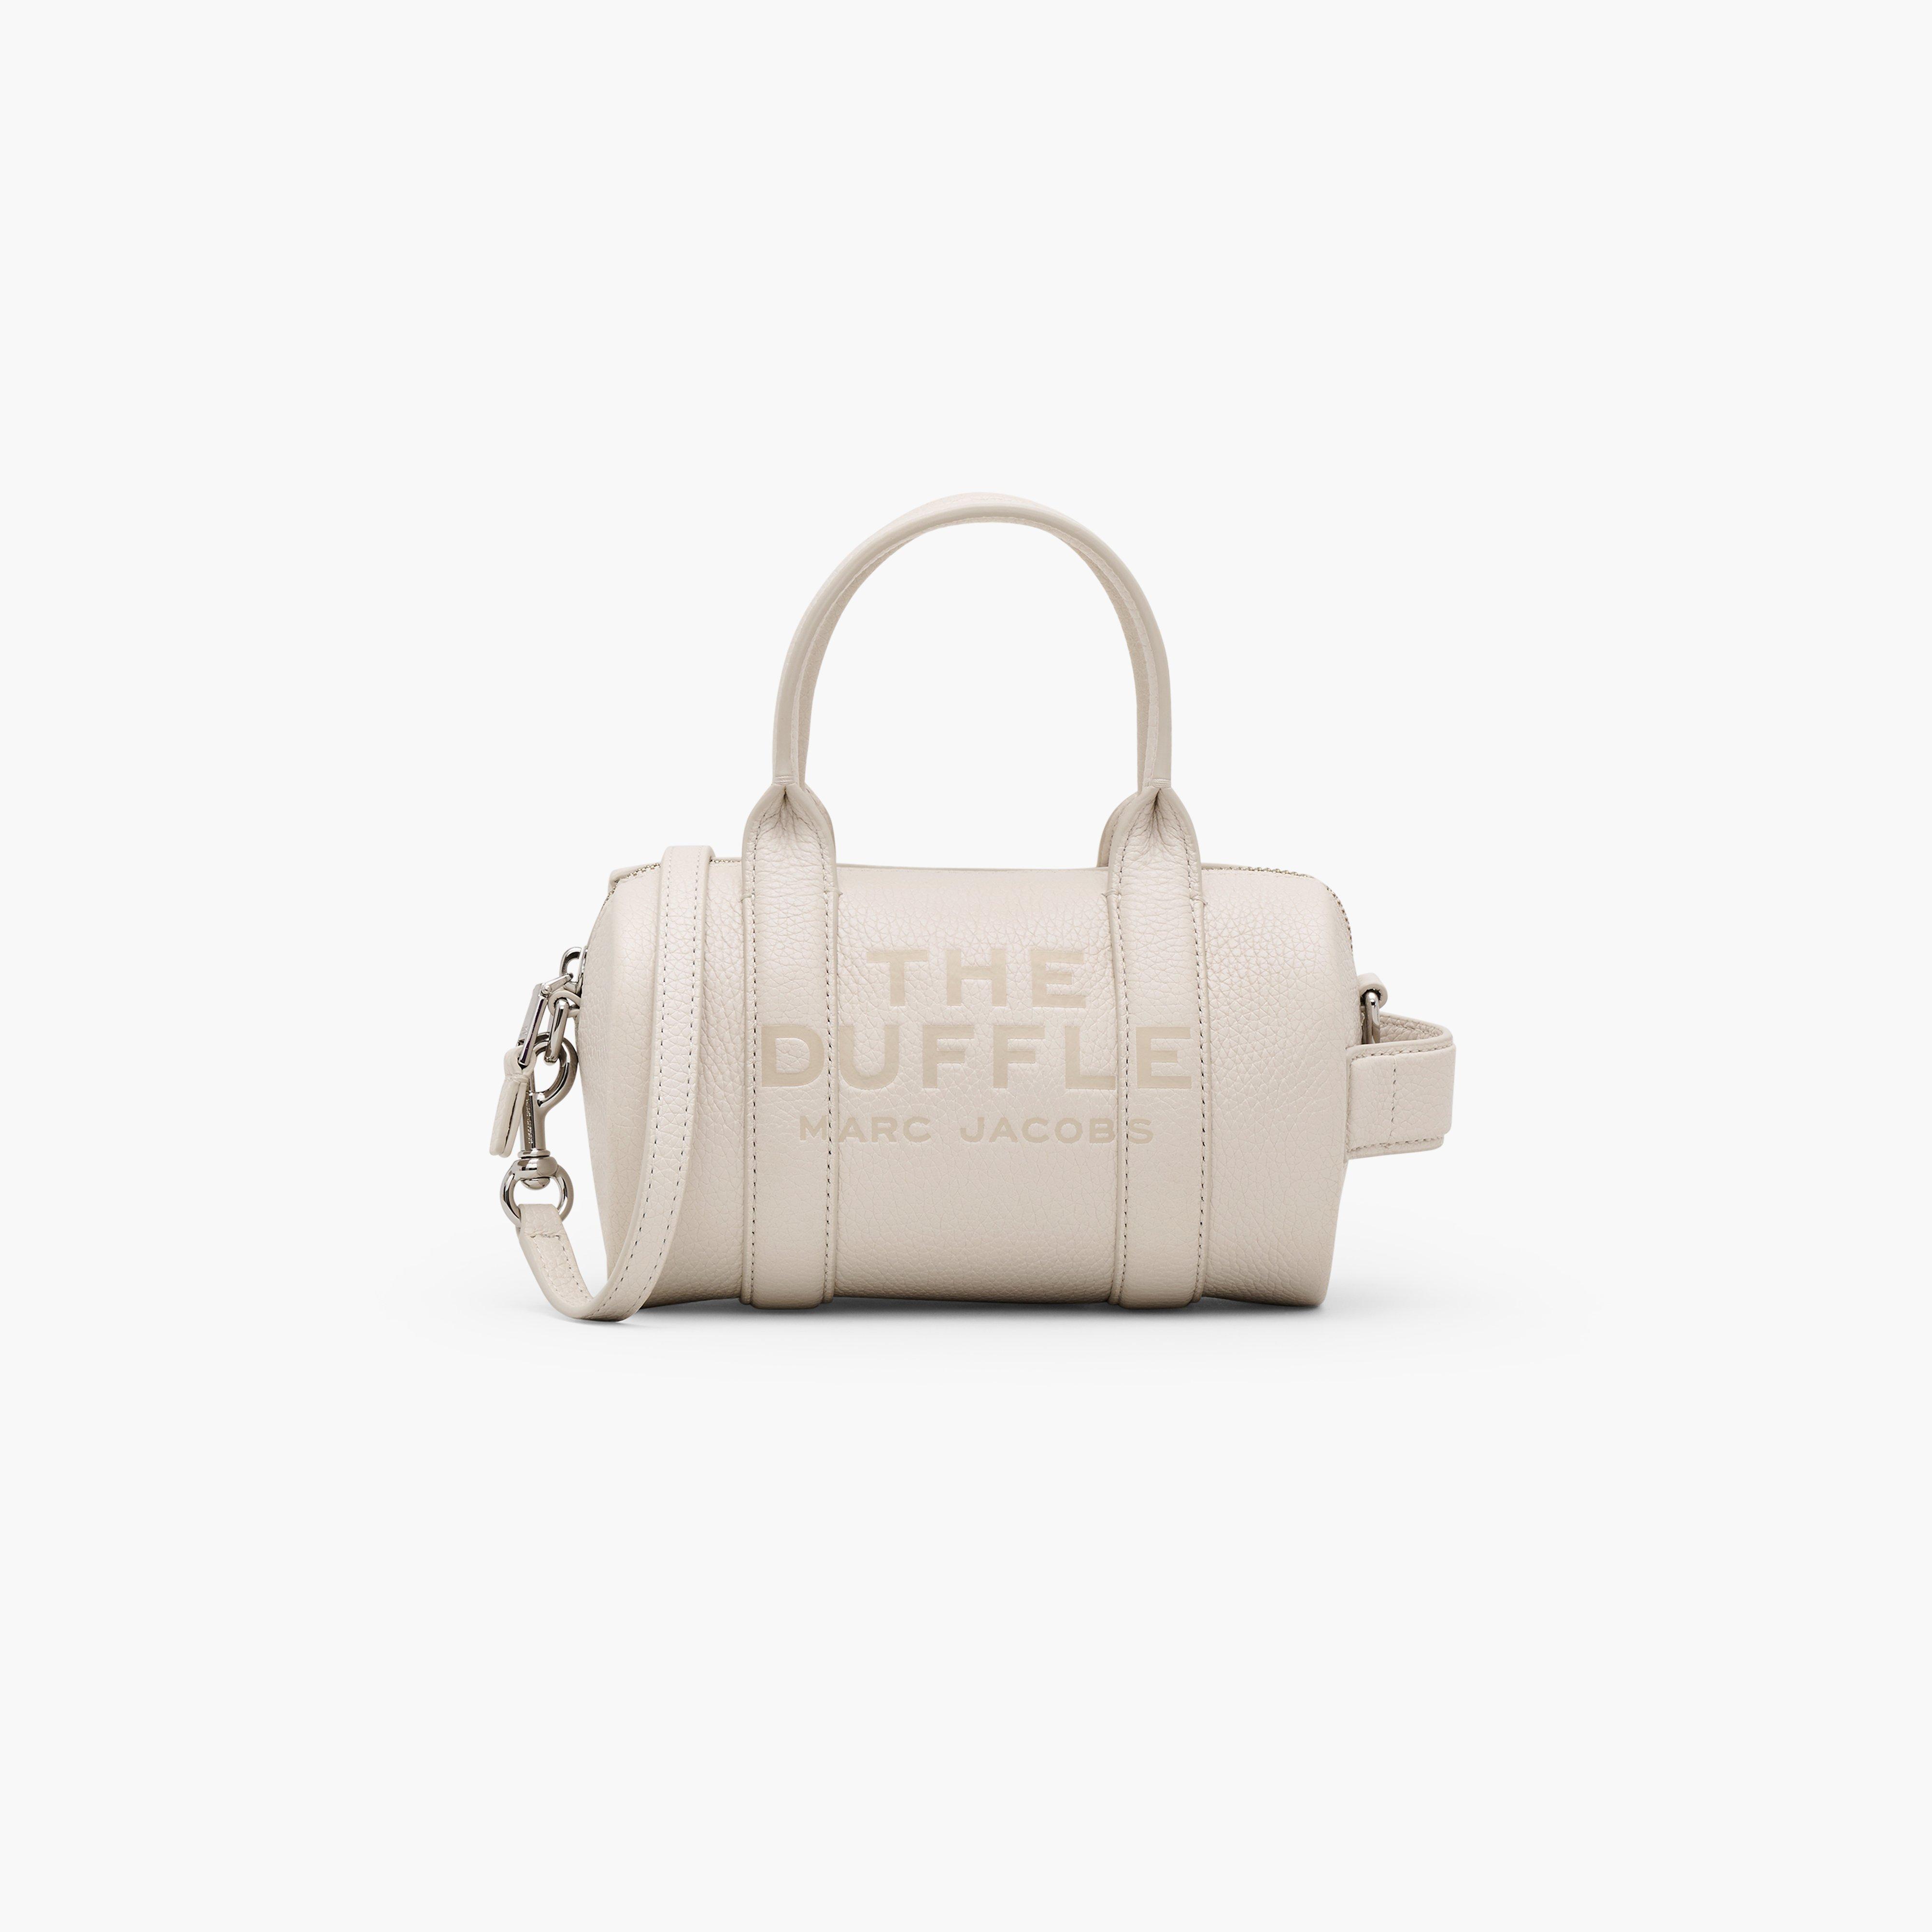 Marc by Marc jacobs The Leather Mini Duffle Bag,COTTON/SILVER